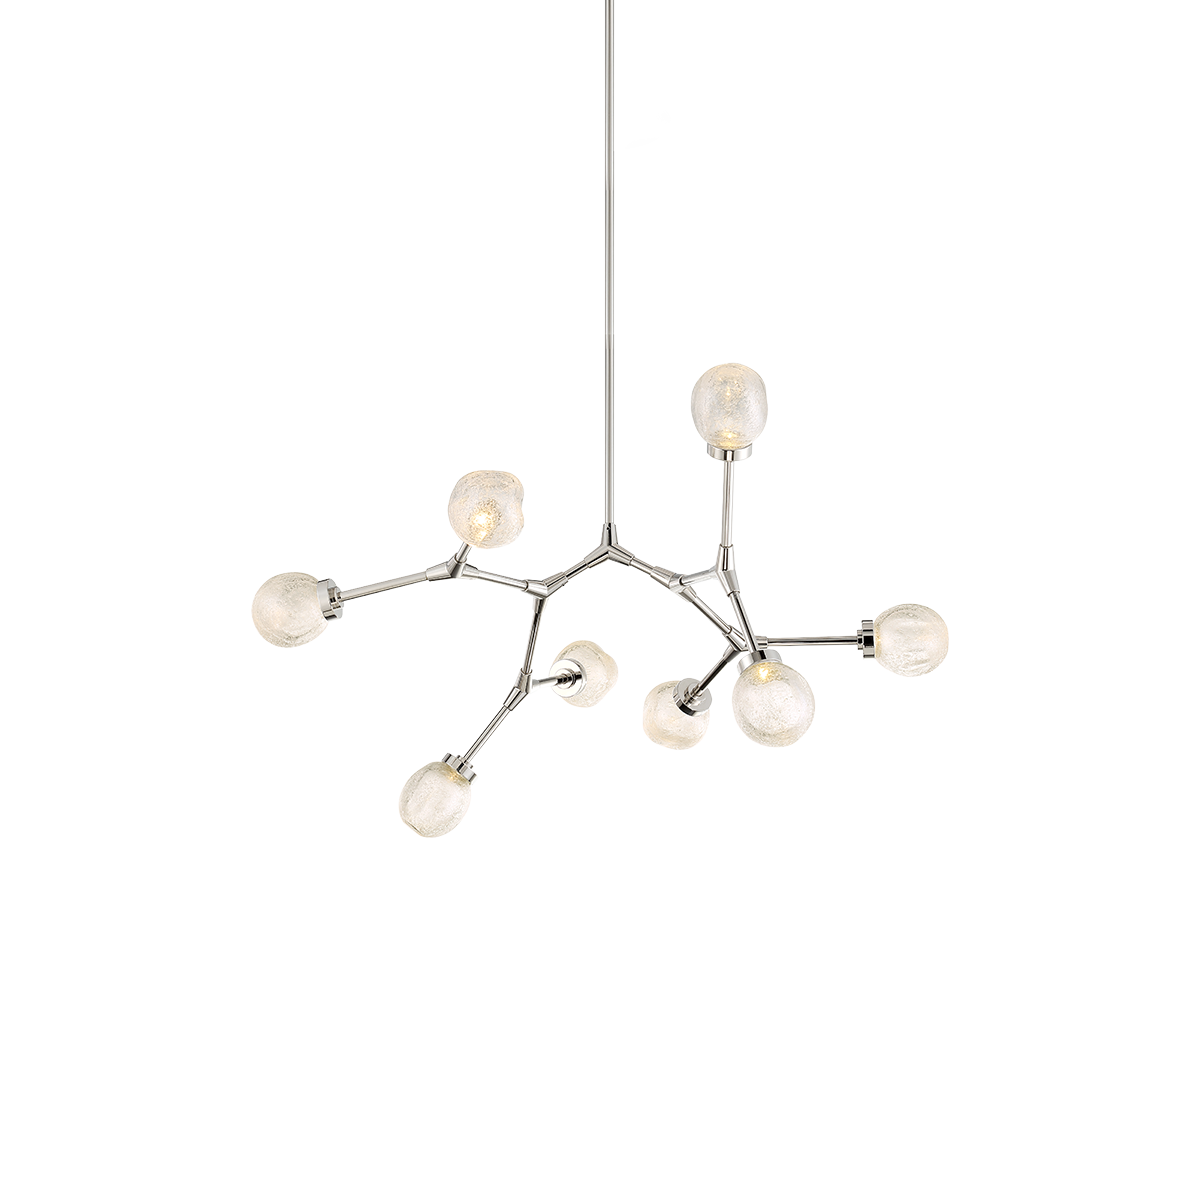 Modern Forms Catalyst Chandelier Light Chandeliers Modern Forms Polished Nickel 28x26x21.375 